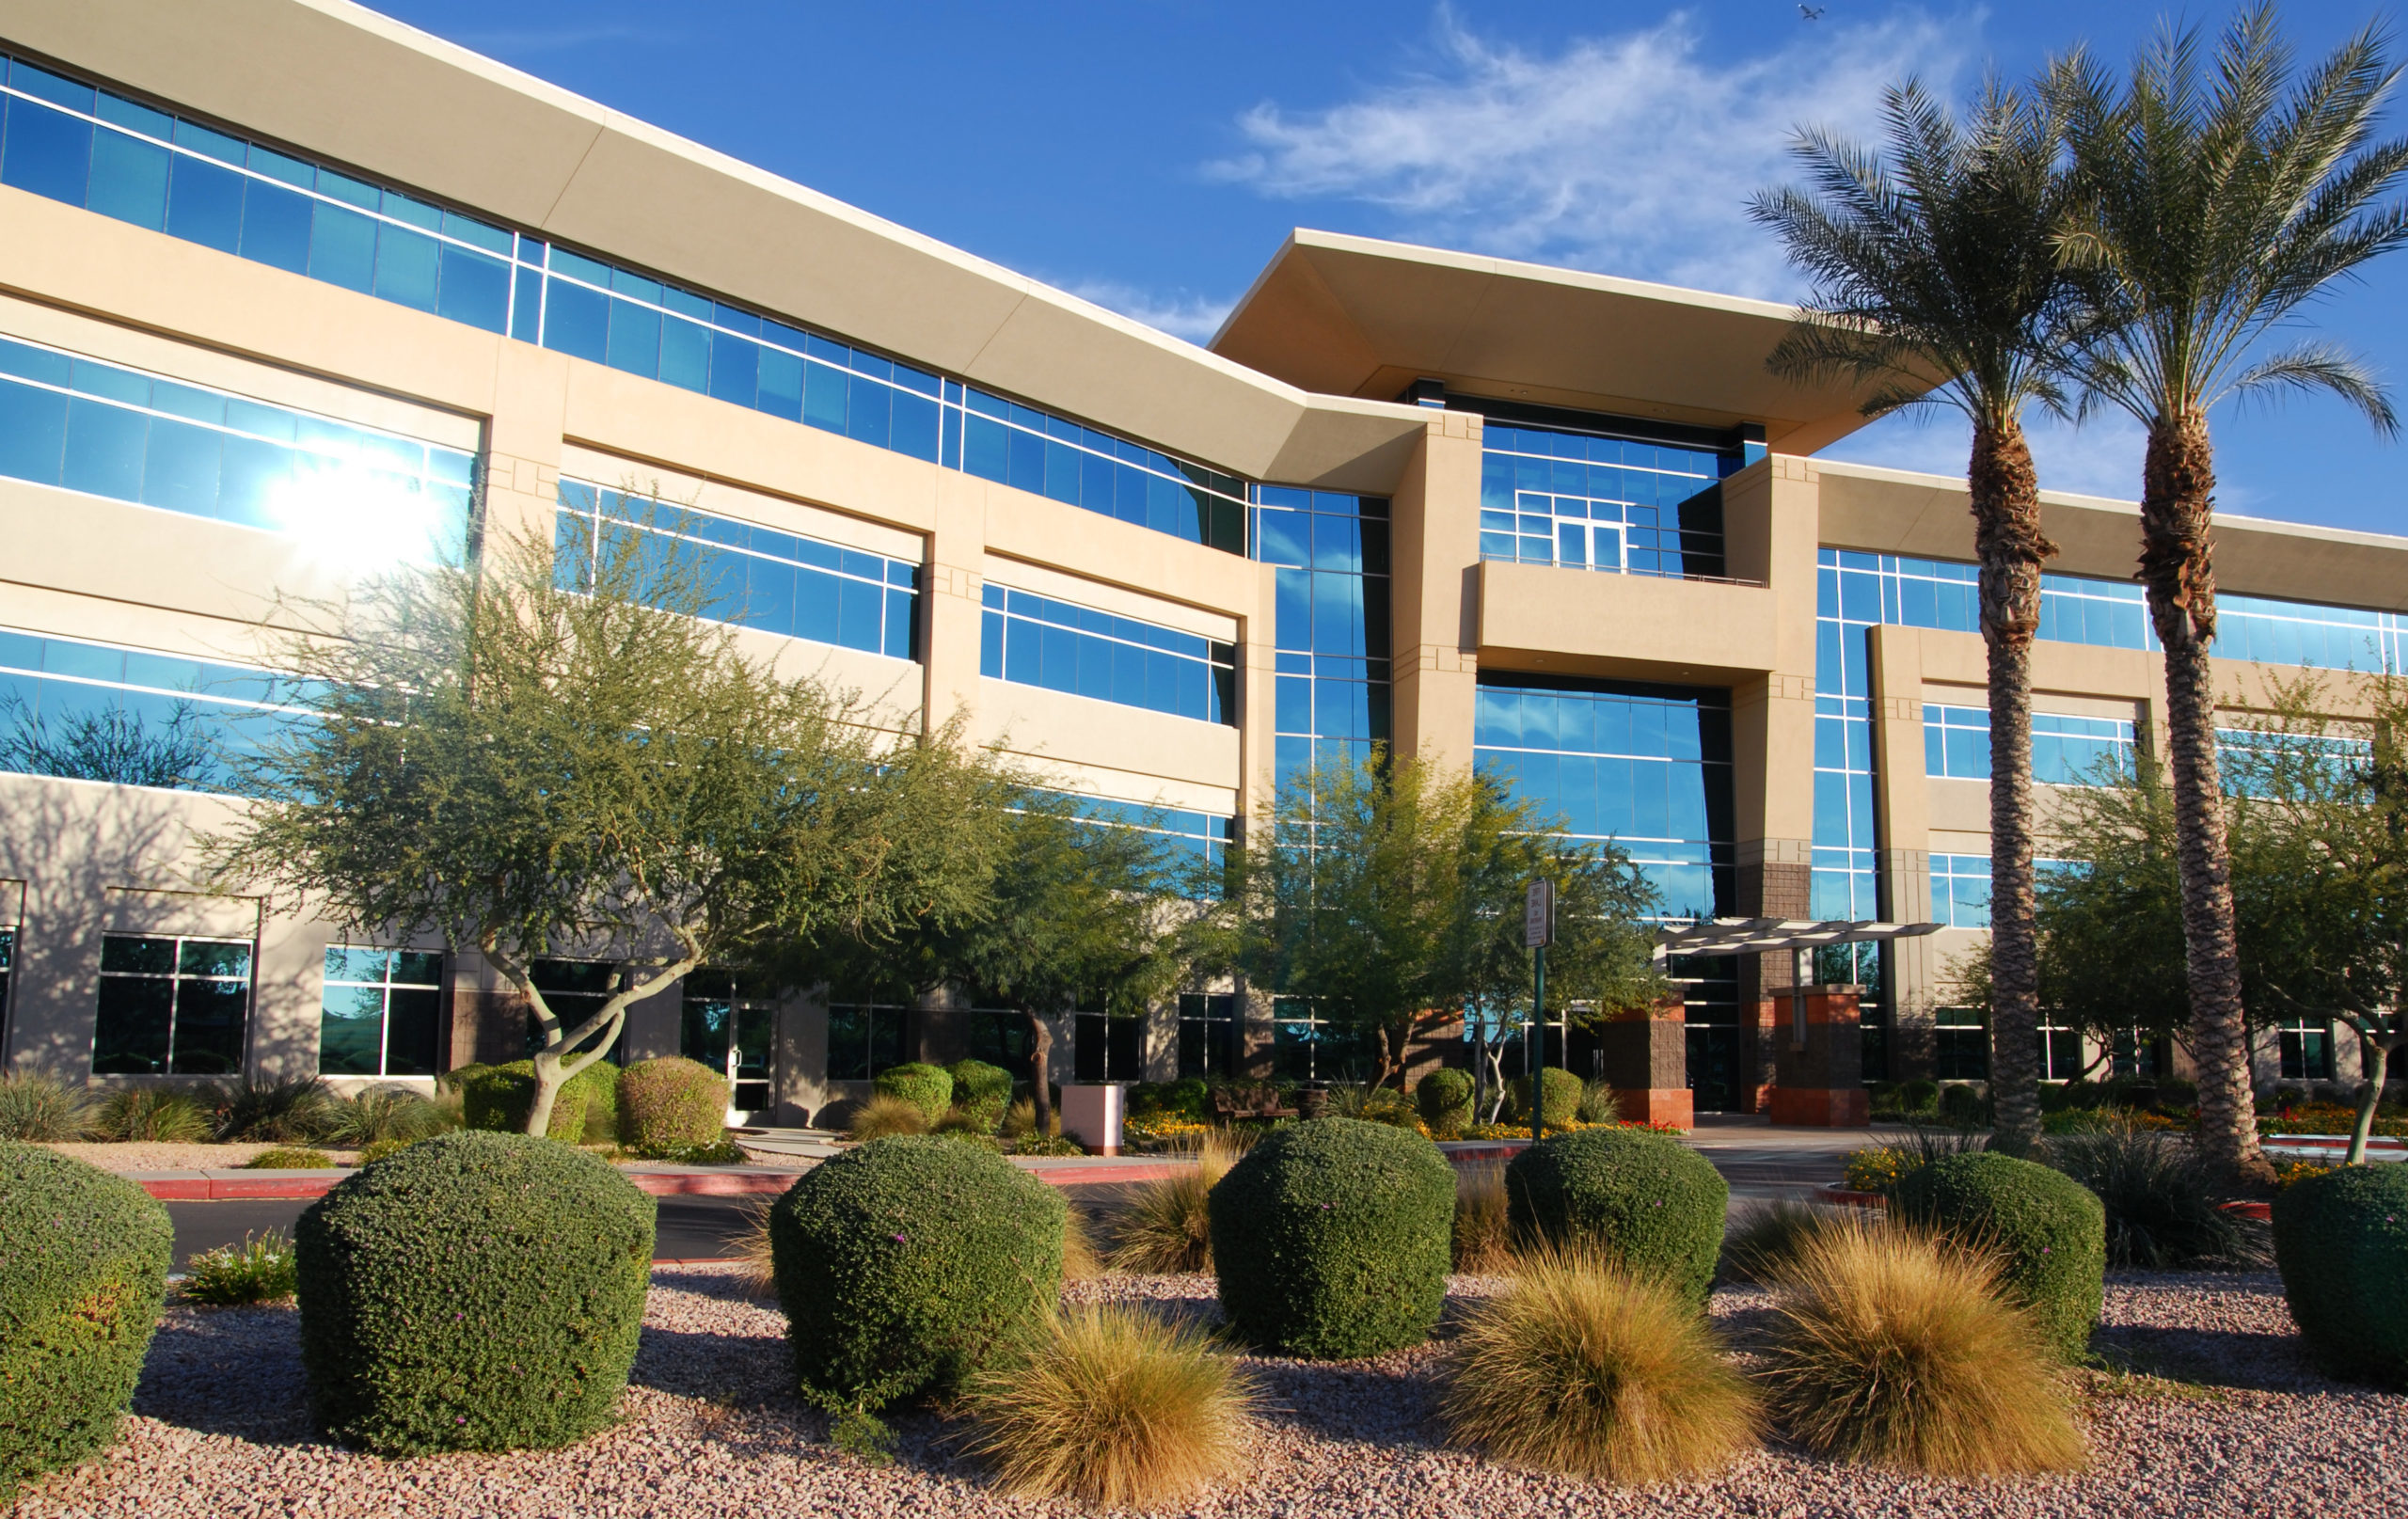 Commercial landscaping services at office building